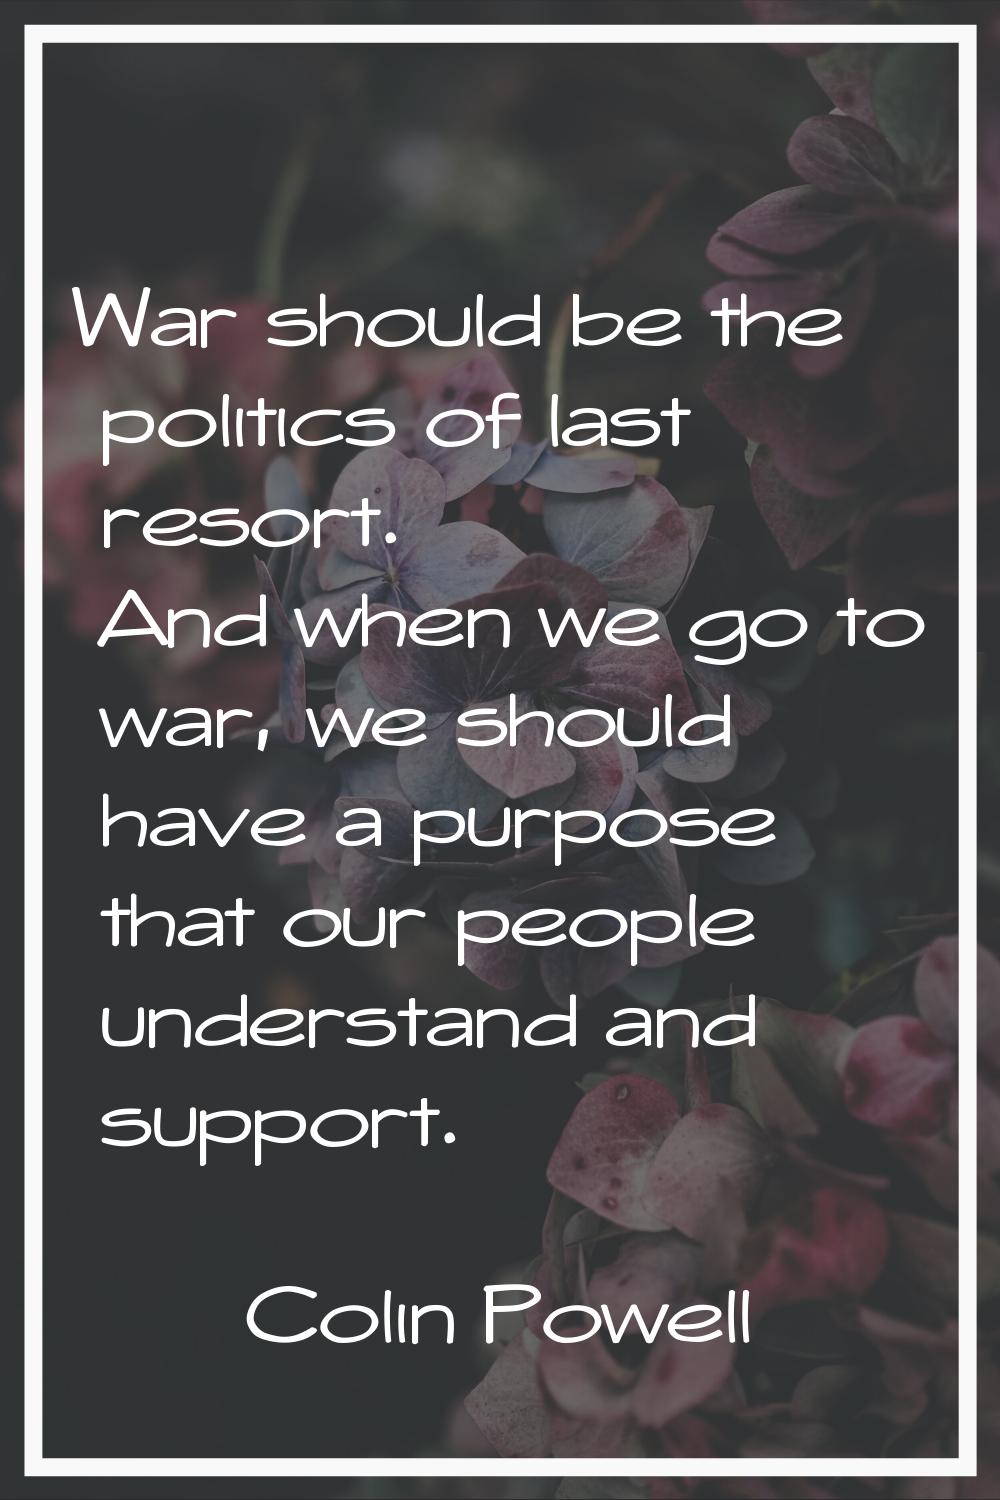 War should be the politics of last resort. And when we go to war, we should have a purpose that our